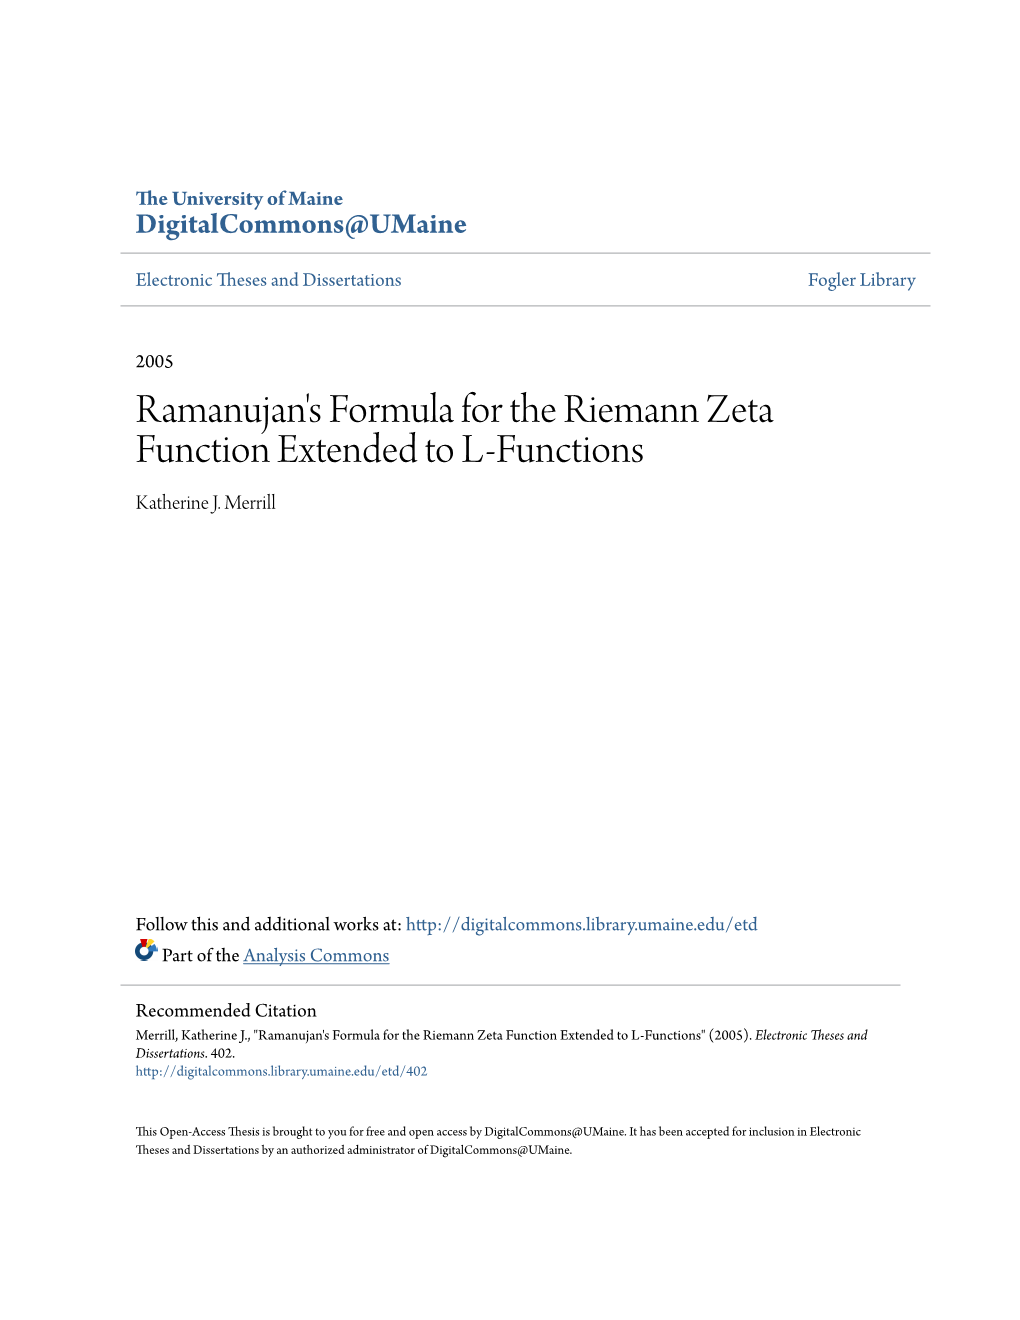 Ramanujan's Formula for the Riemann Zeta Function Extended to L-Functions Katherine J